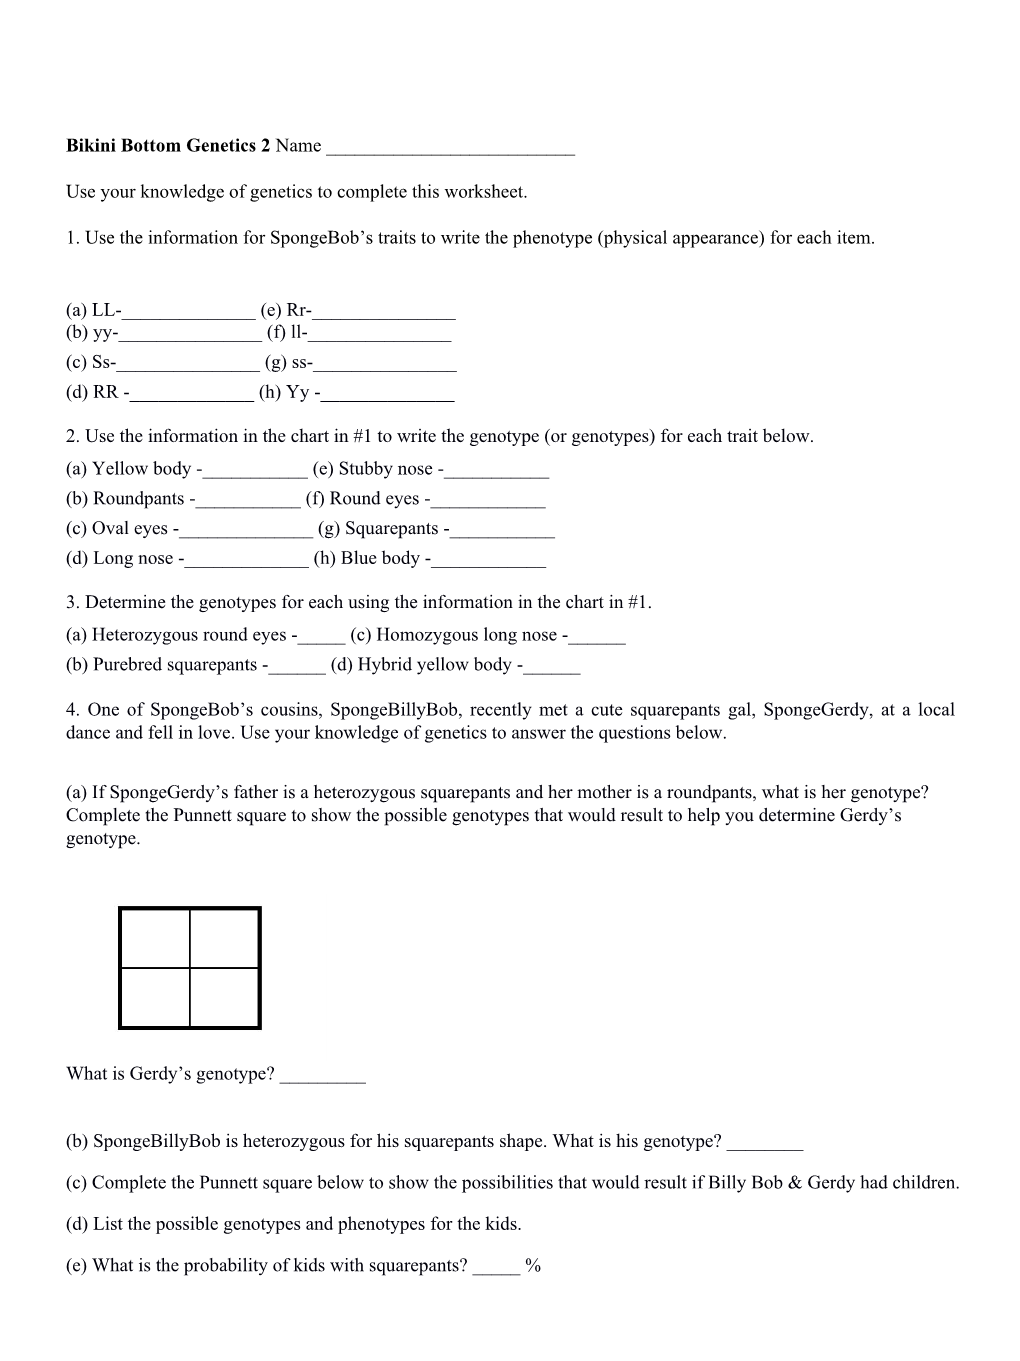 Use Your Knowledge of Genetics to Complete This Worksheet